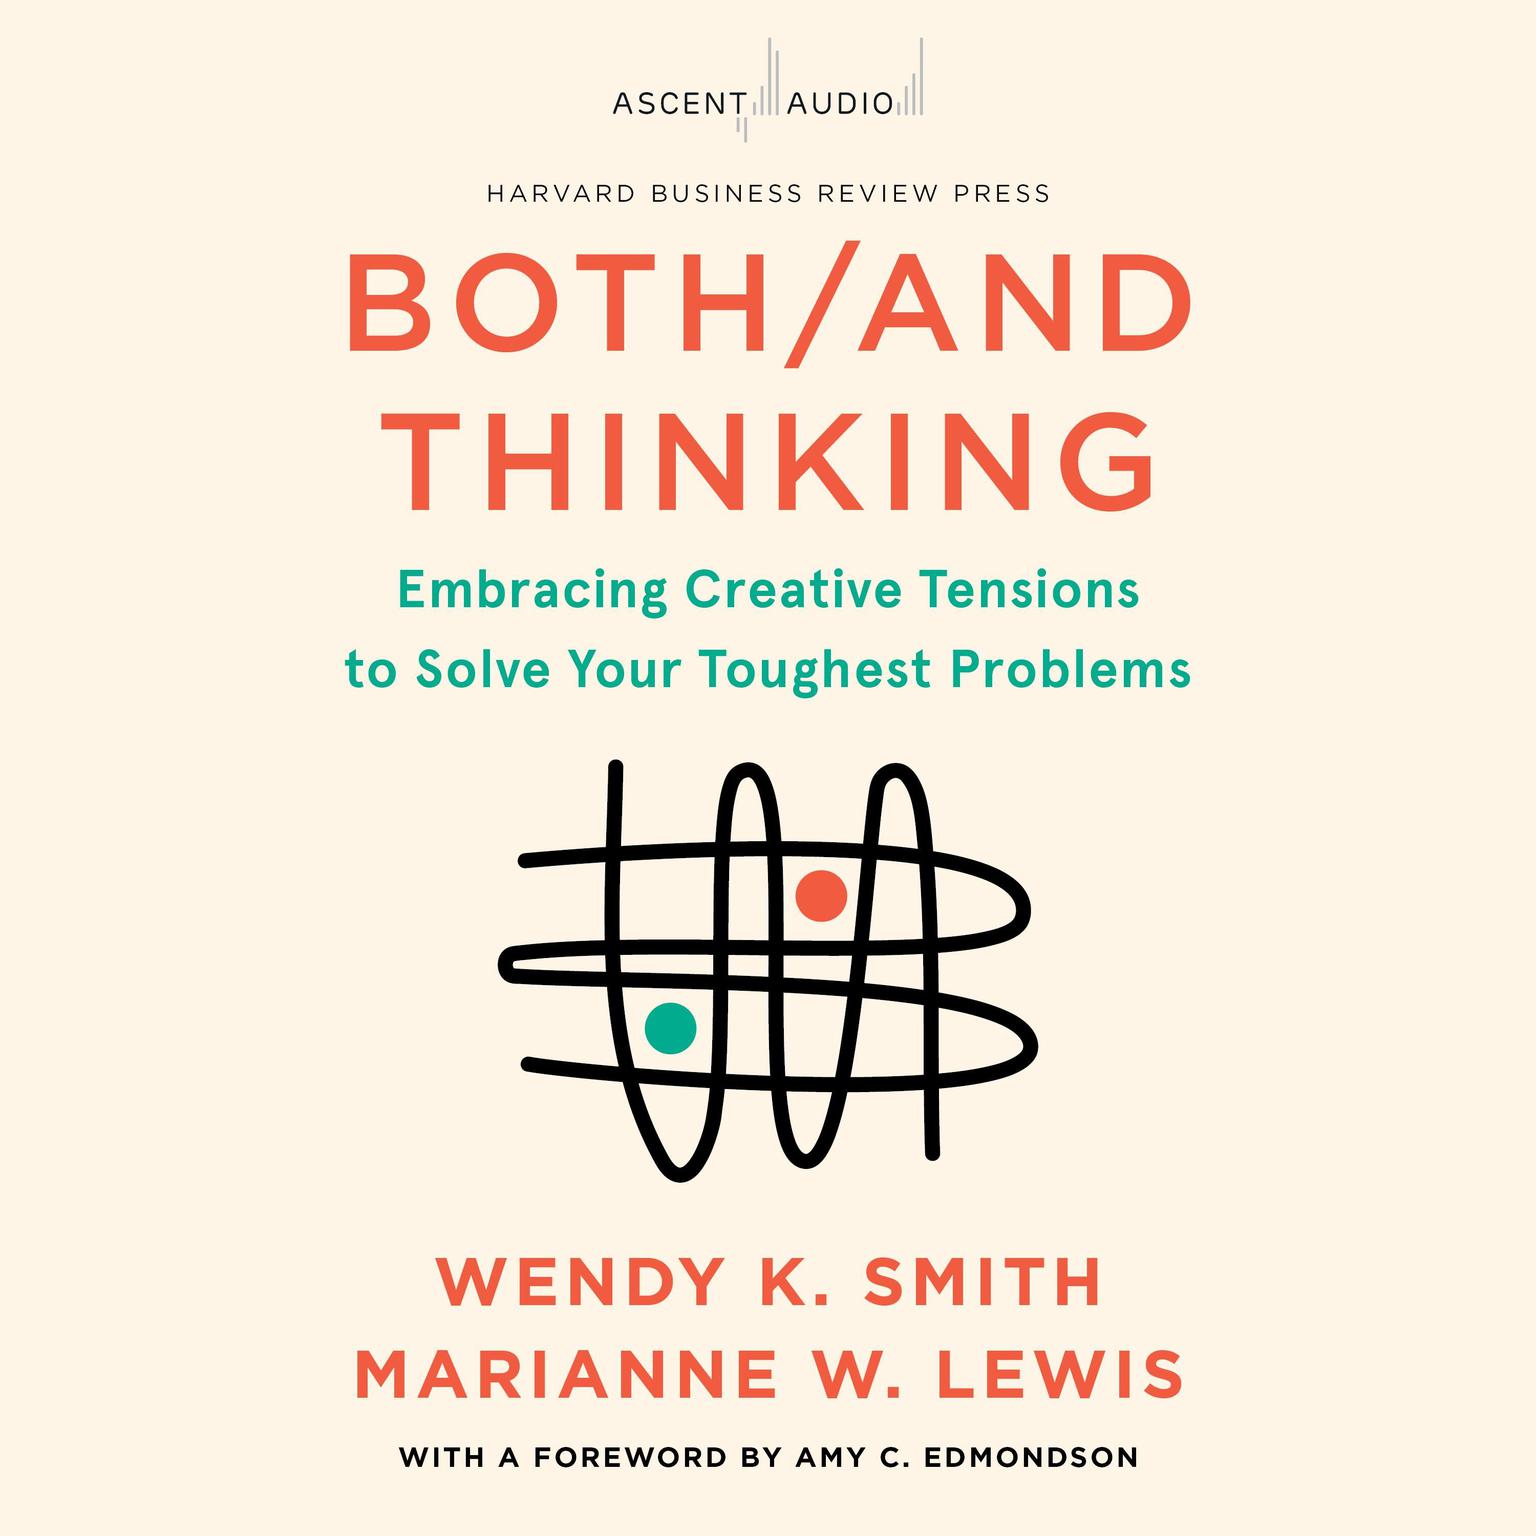 Both/And Thinking: Embracing Creative Tensions to Solve Your Toughest Problems Audiobook, by Marianne Lewis